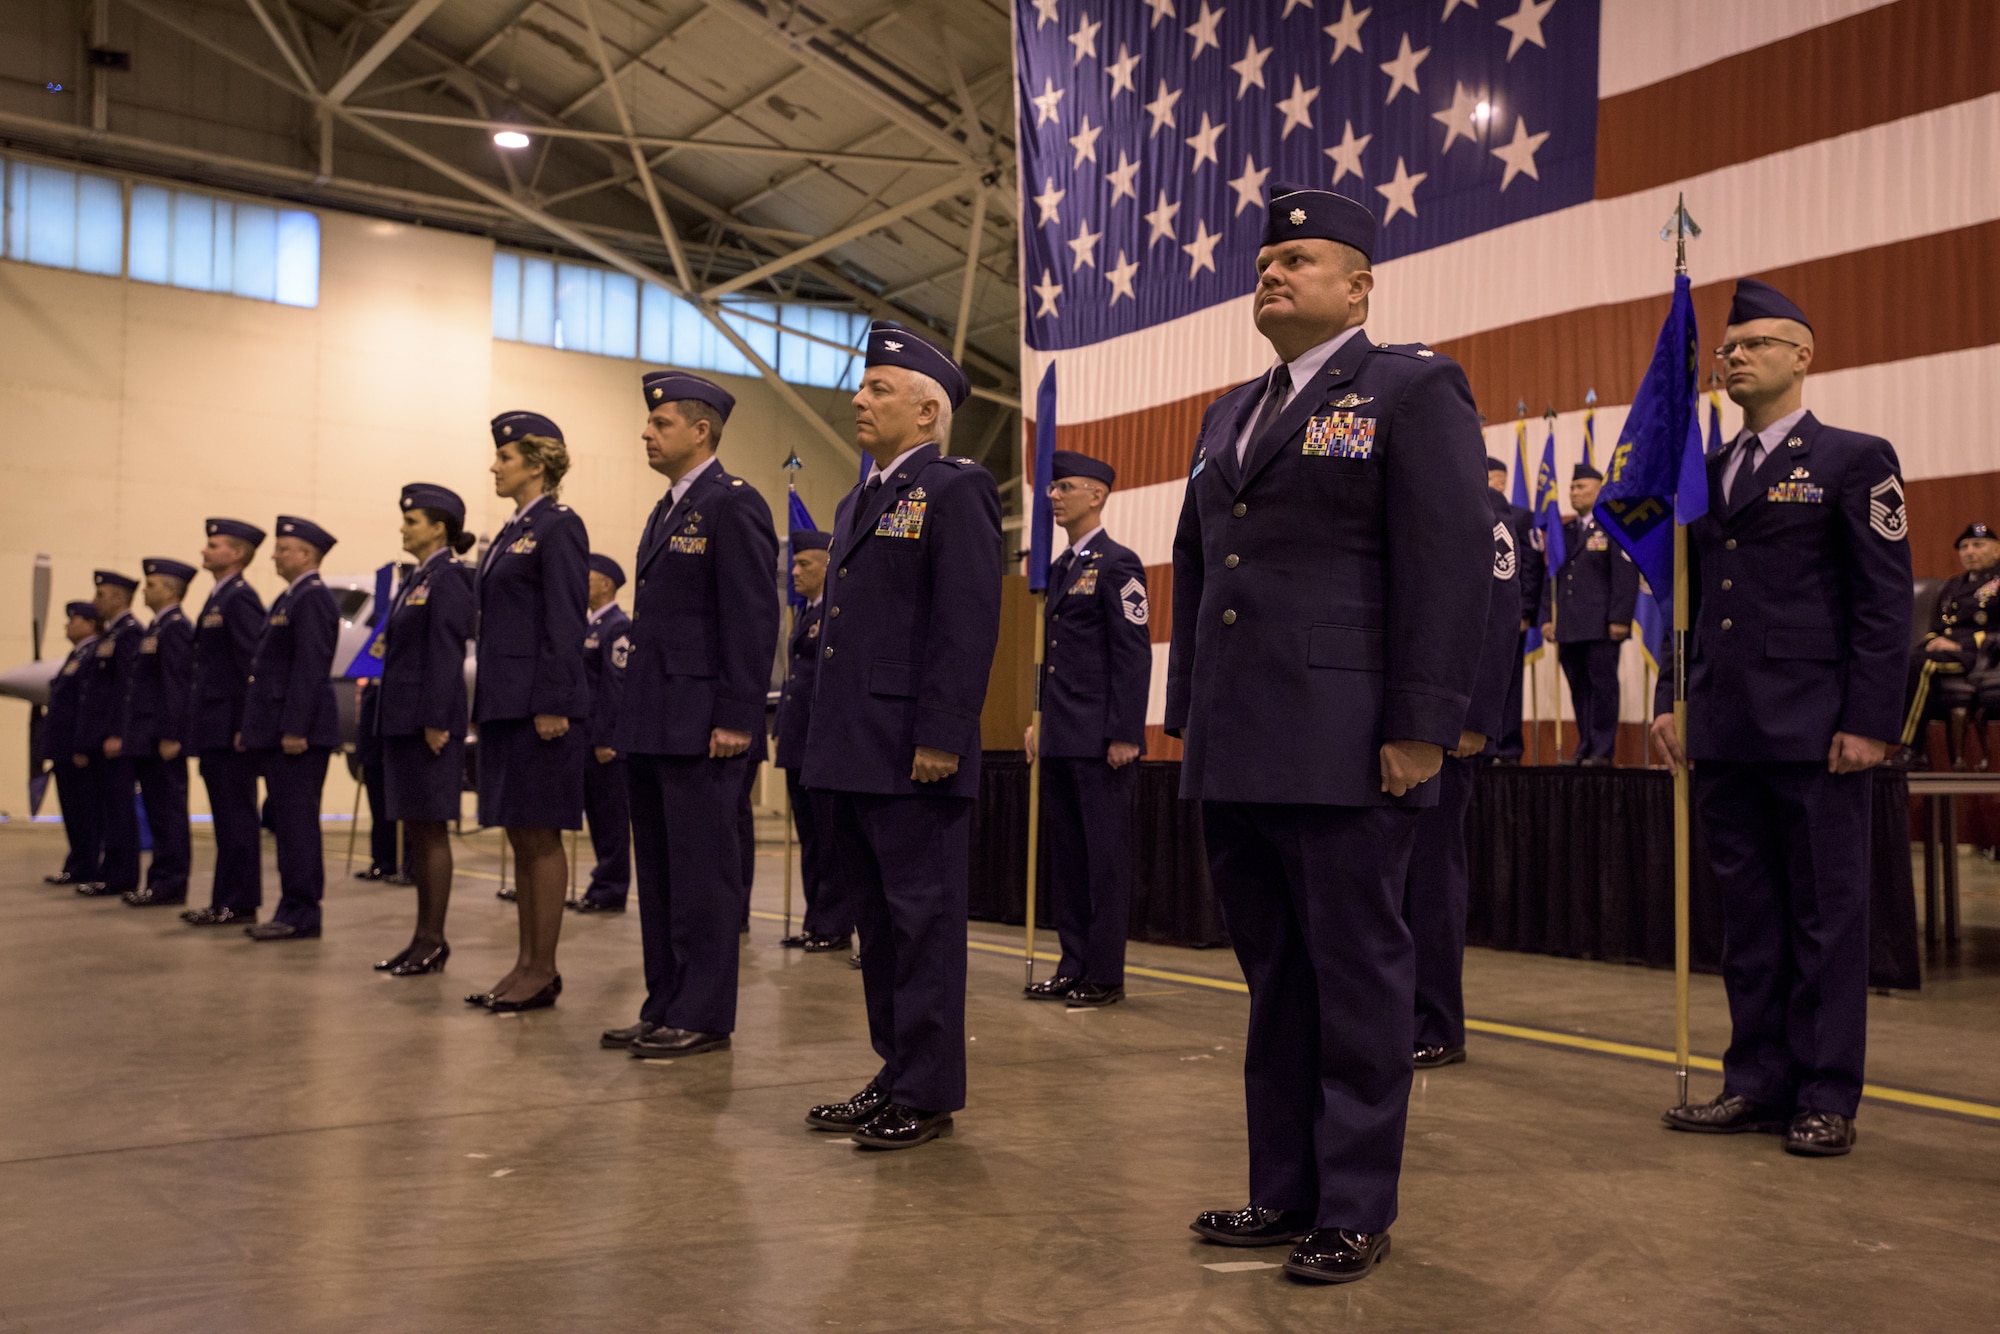 137th Special Operations Wing squadron and group commanders and senior ranking enlisted members stand in formation during a re-designation ceremony at the 137th Special Operations Wing at Will Rogers Air National Guard Base, Oklahoma City, Dec. 3, 2016. The ceremony marks the official transition of the Wing from its former air refueling mission to its current special operations mission, making the Wing the second Air National Guard wing to be a part of AFSOC and the only U.S. Air Force entity to fly and maintain the MC-12W. (U.S. Air National Guard photo by Tech. Sgt. Caroline Essex)